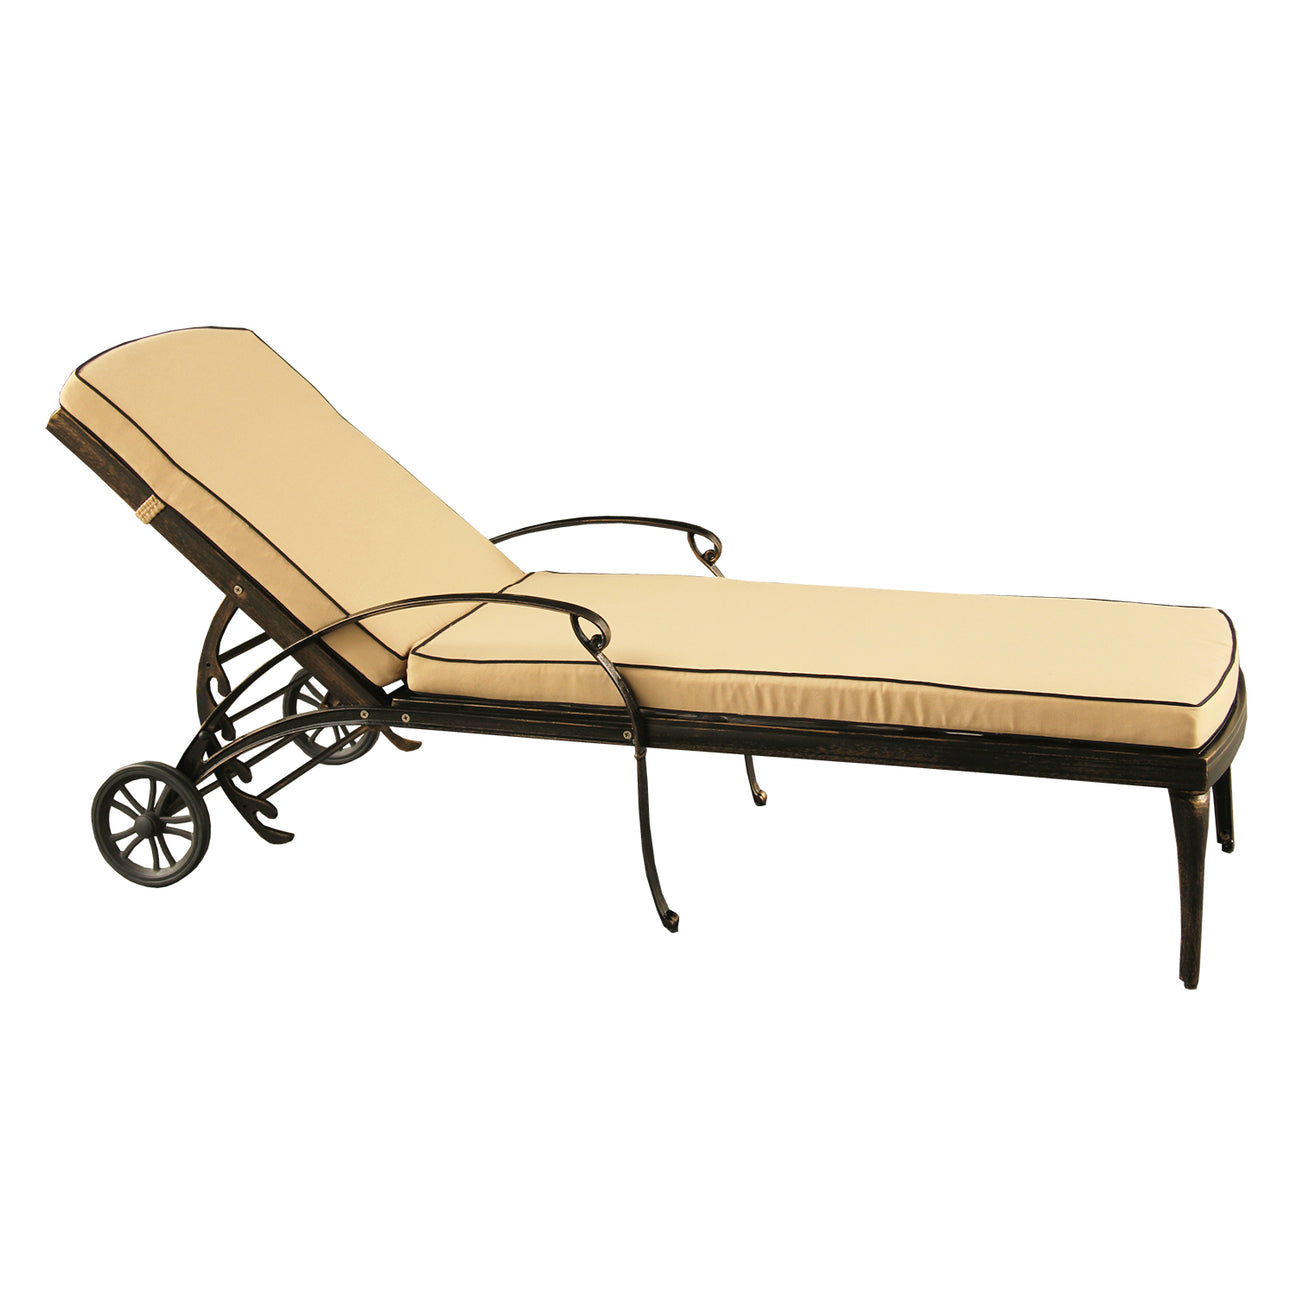 Patio Chaise Lounges